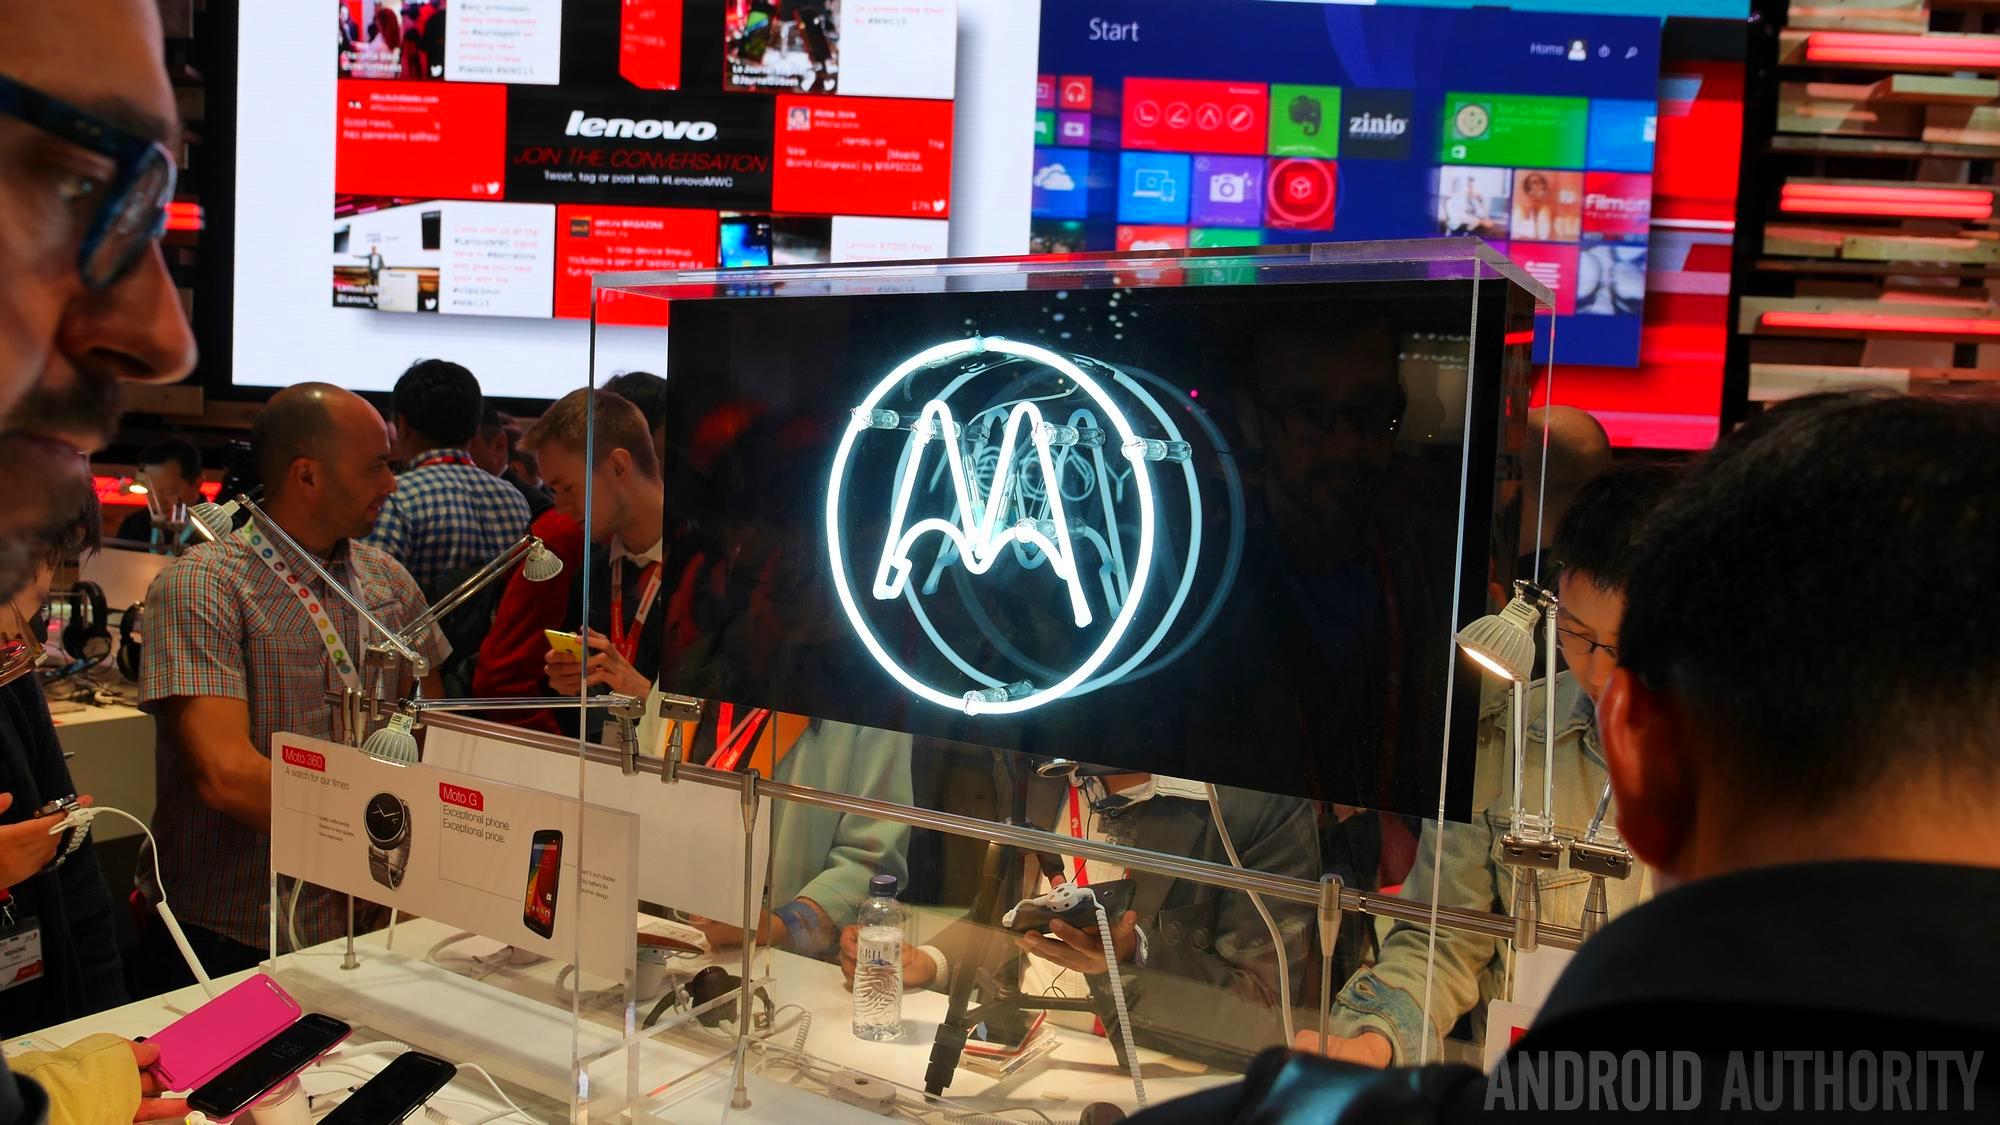 MWC 2015 showing people browsing gadgets and a Motorola illuminated logo.